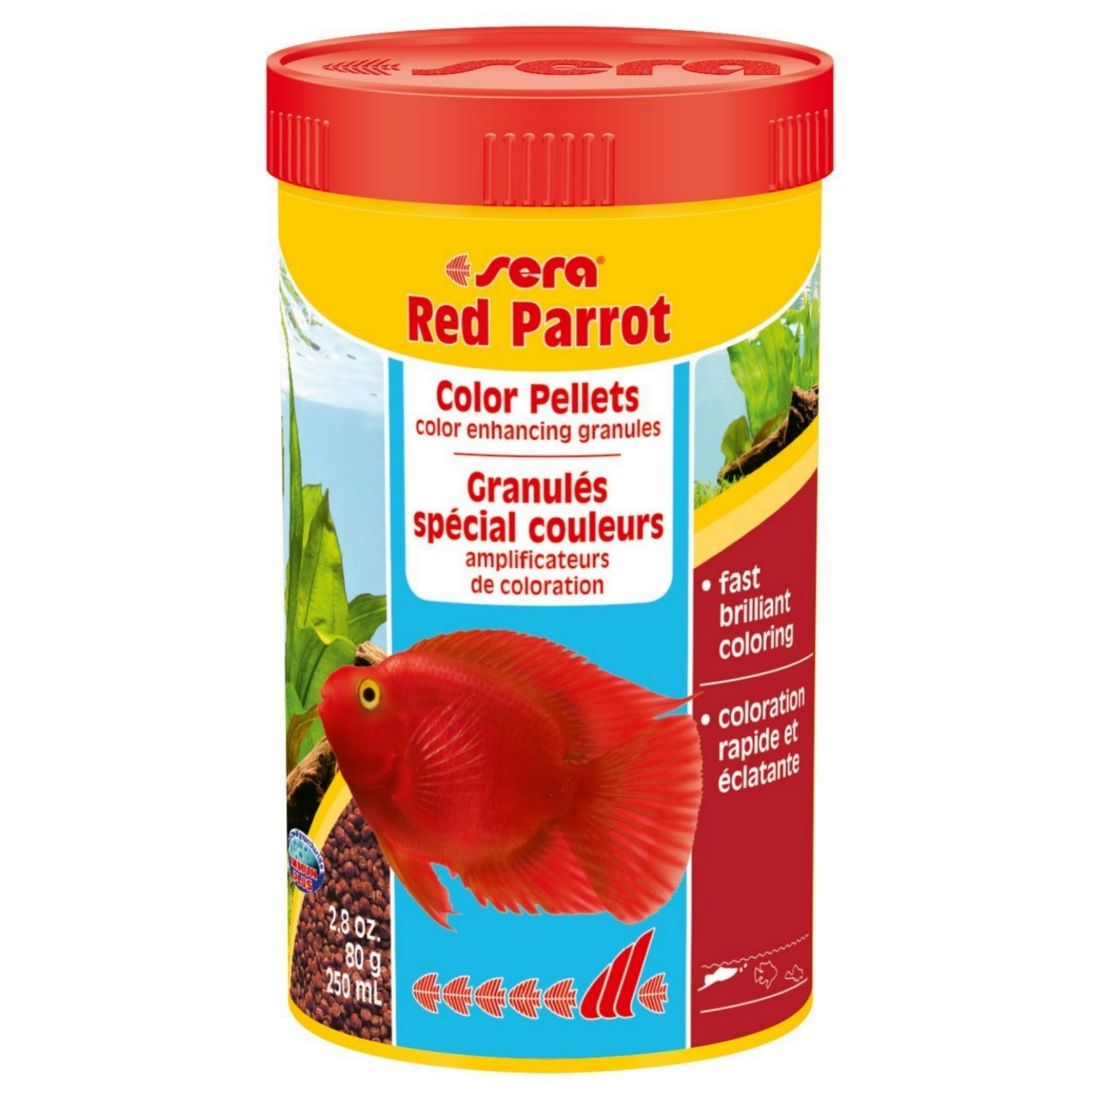 PS TRADER 80 g SERA Red Parrot for Brillent Coloration